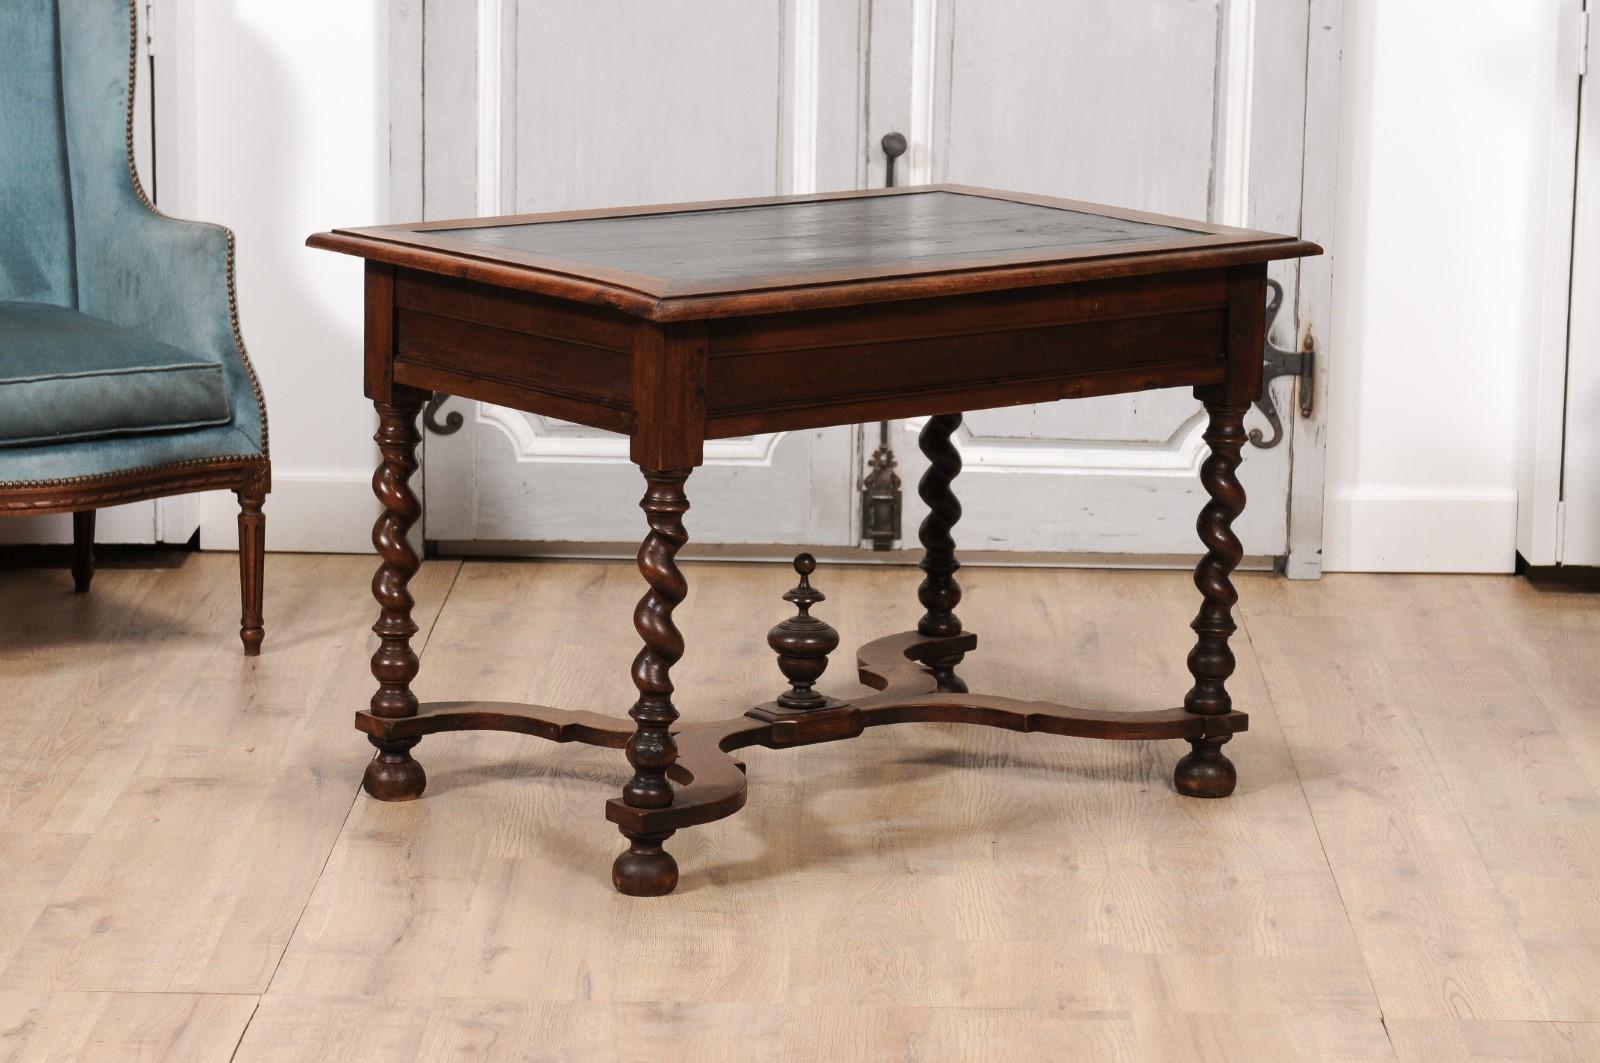 Louis XIII Period 1630s Carved Walnut Barley Twist Table with Black Painted Top For Sale 1